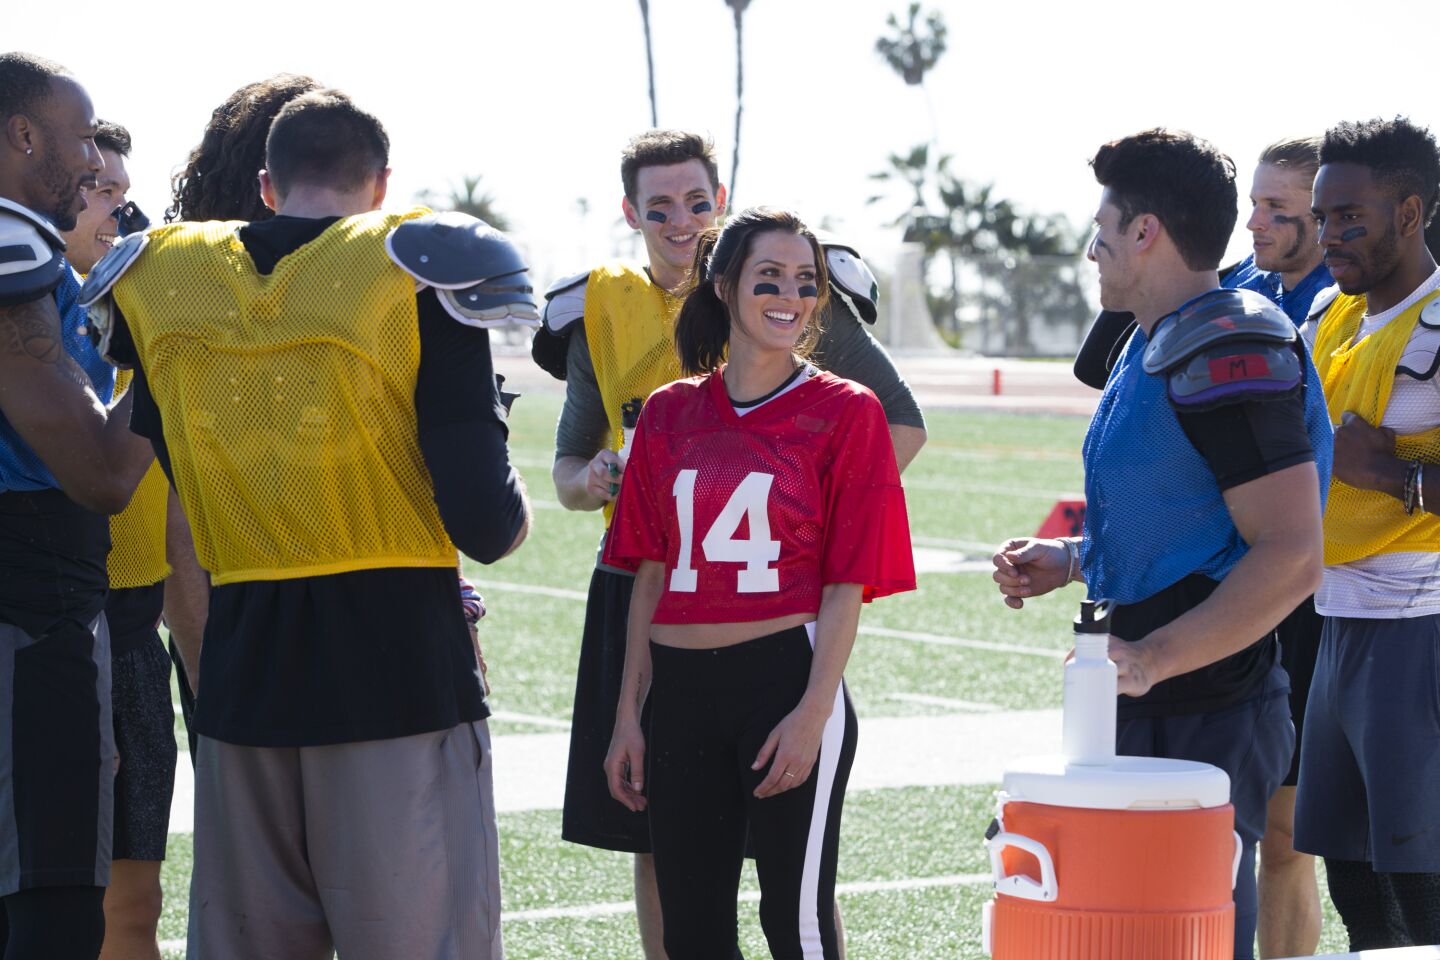 Becca Kufrin and her suitors on The Bachelorette compete in a football-themed challenge.